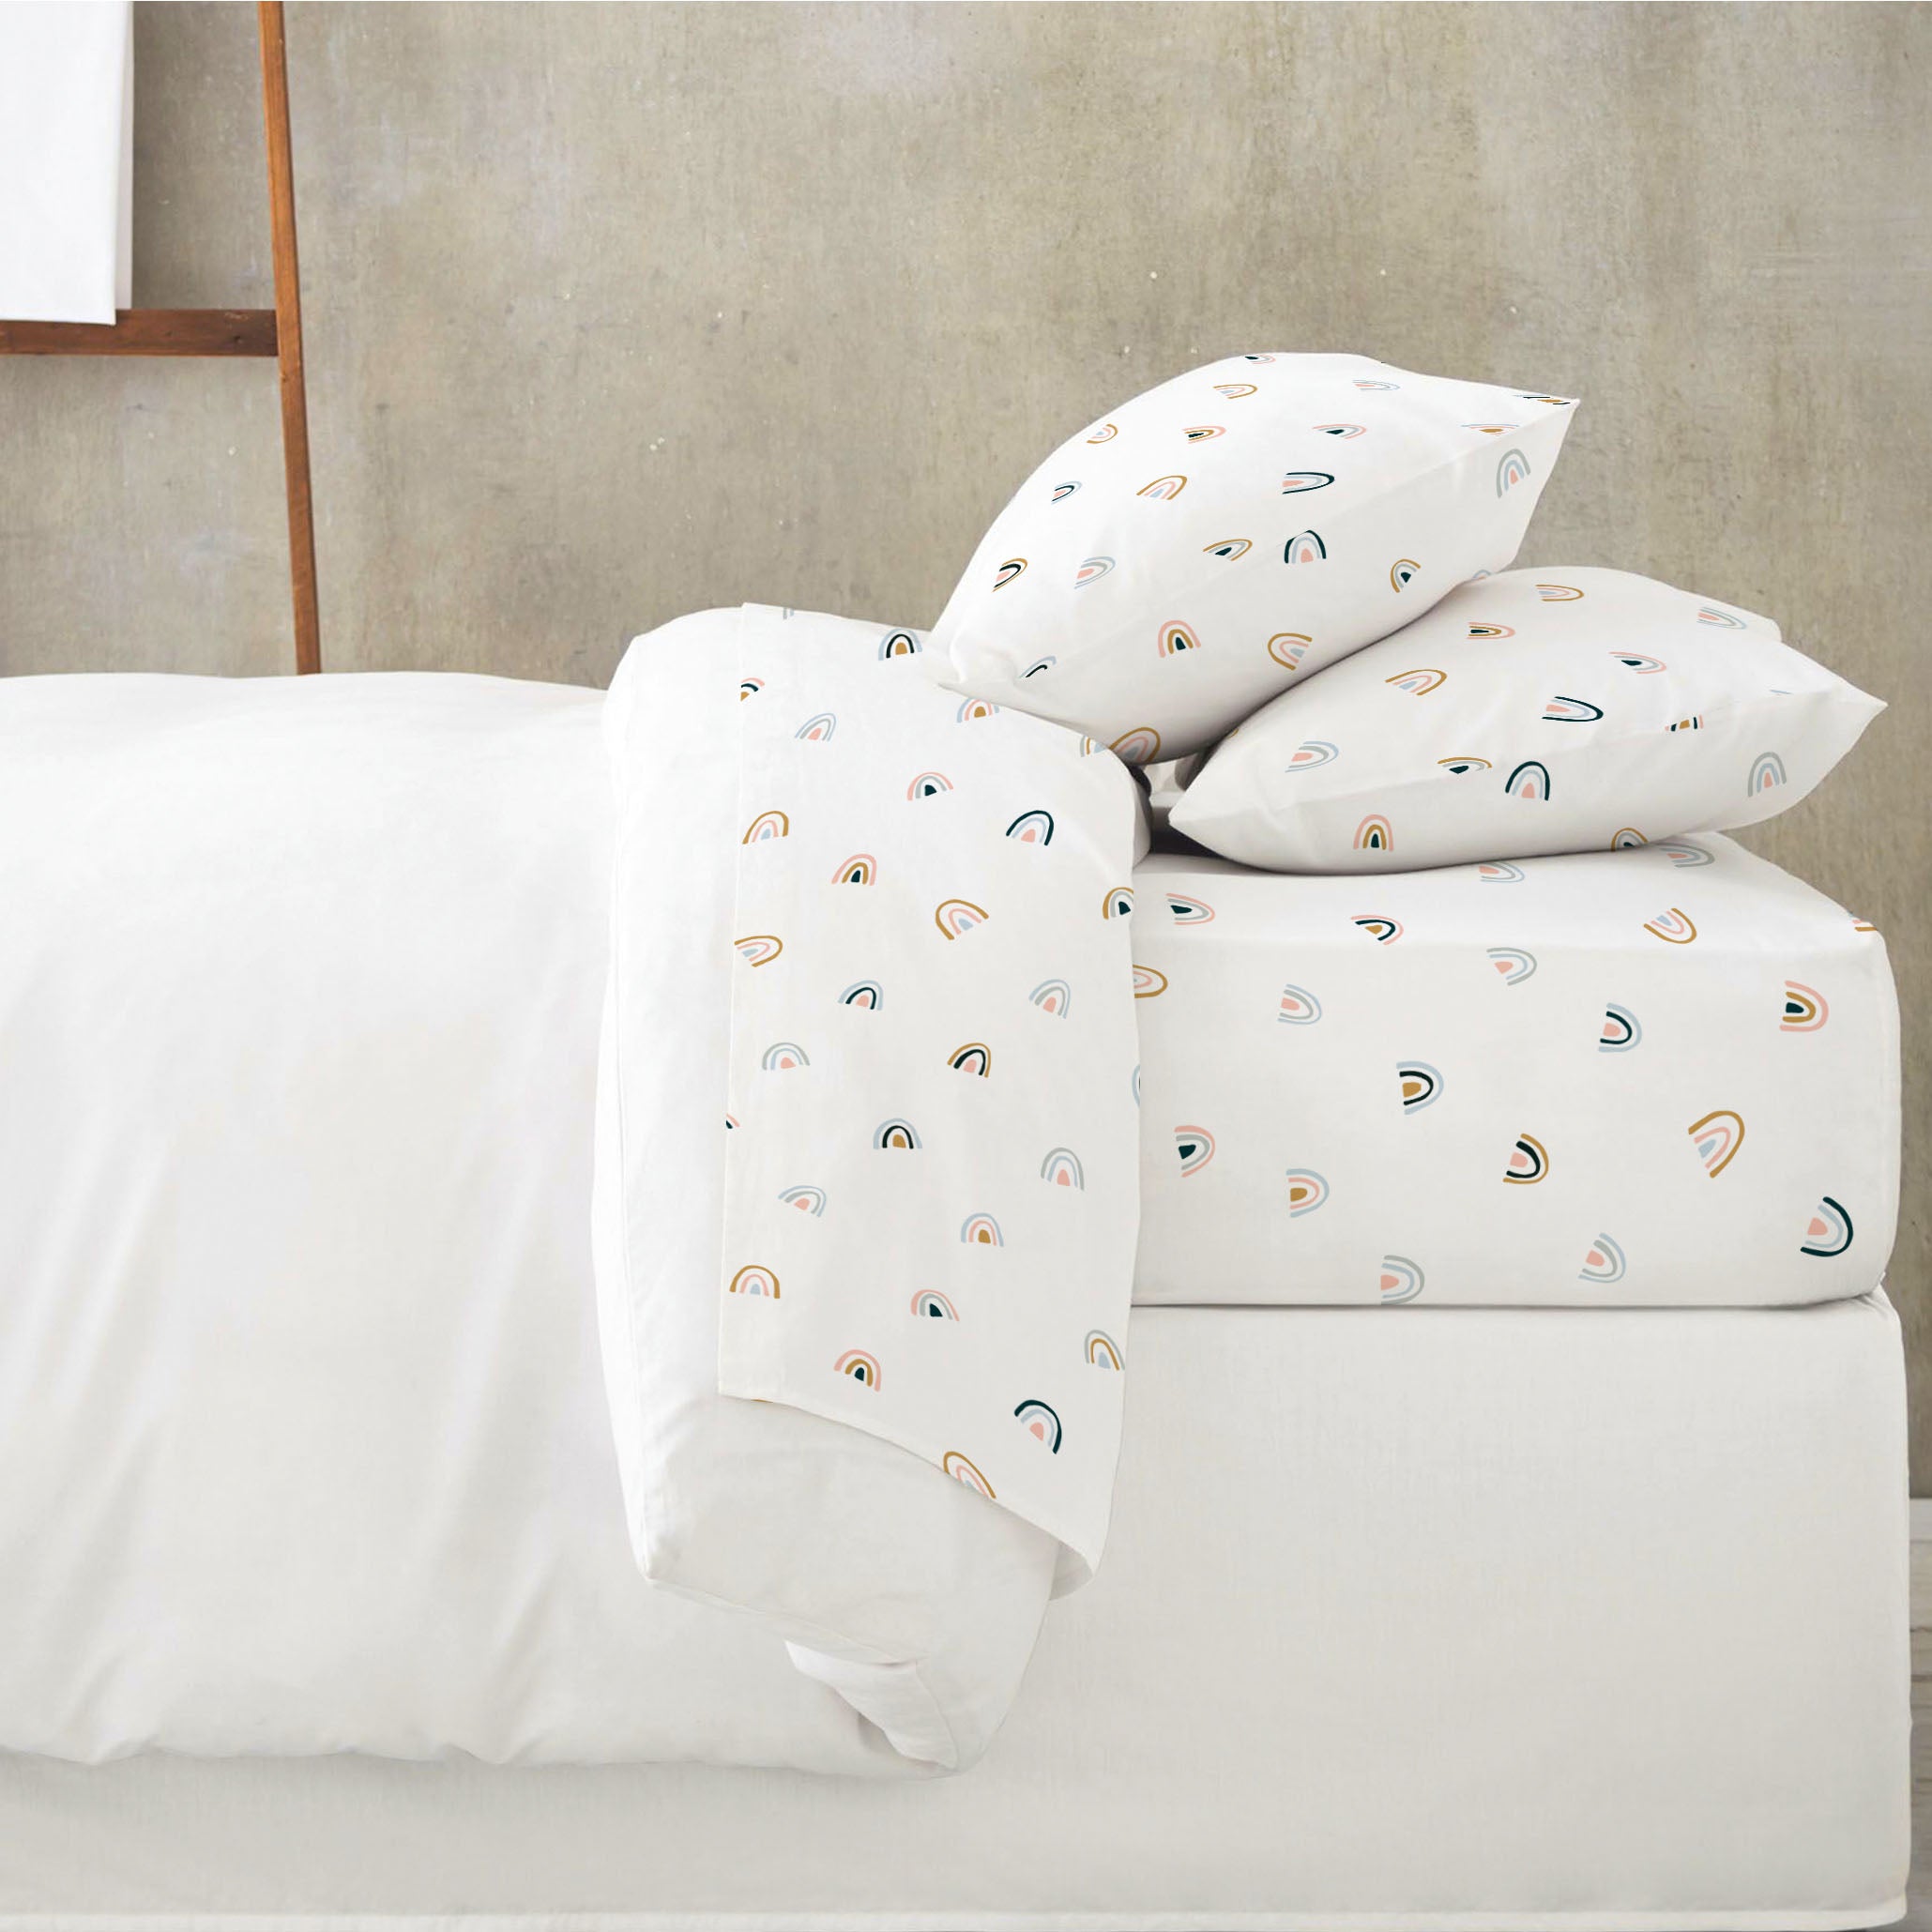 A neatly made bed featuring a white duvet and pillows with a playful Over The Rainbow organic cotton sheet set cover in a room with a concrete wall by Makemake Organics.